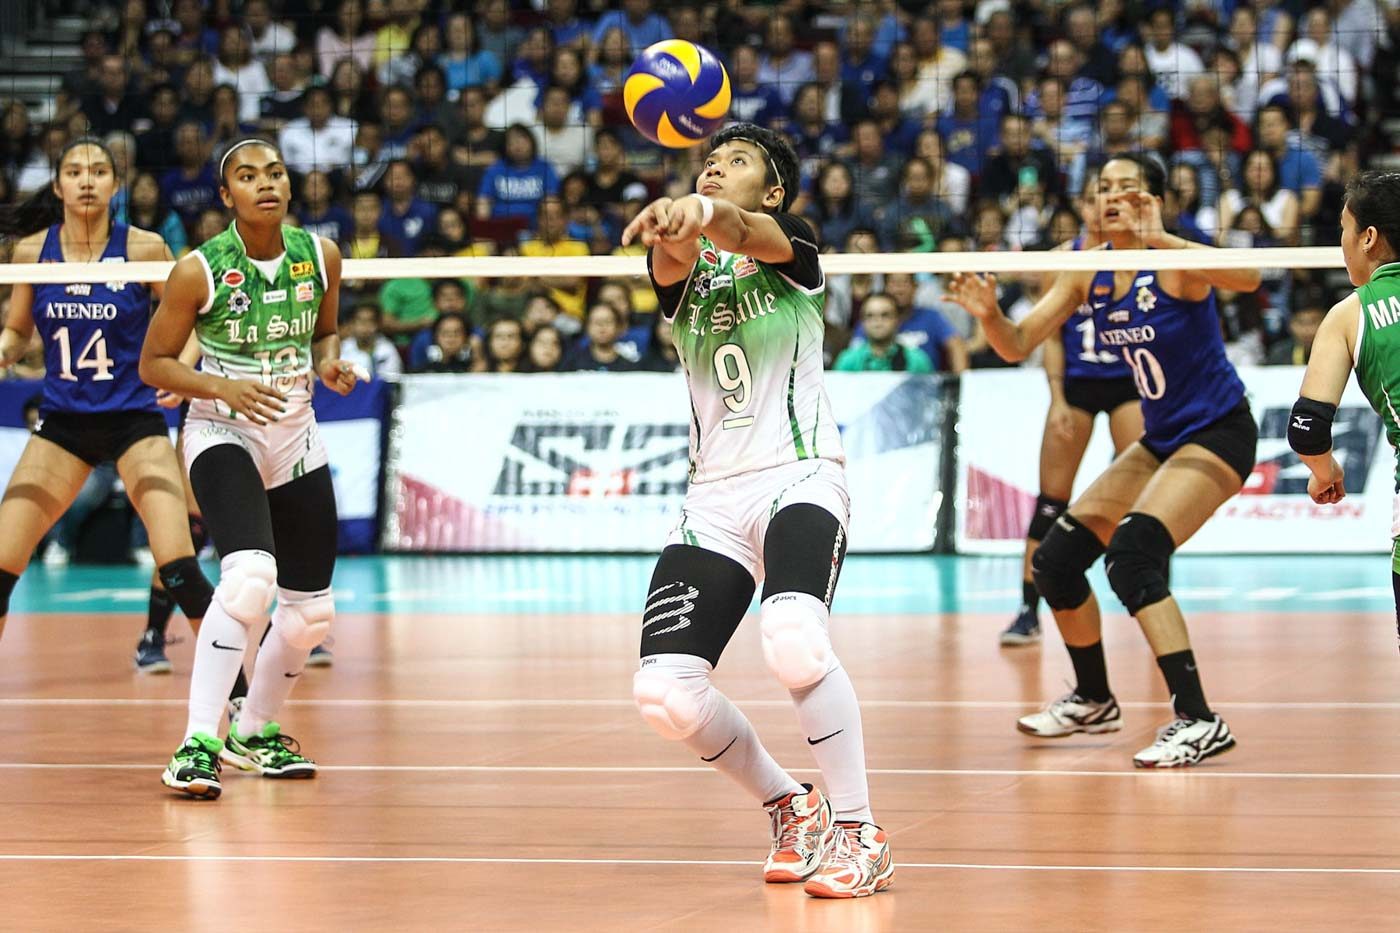 Rivalry continues as Lady Eagles, Lady Spikers prepare for round two battle